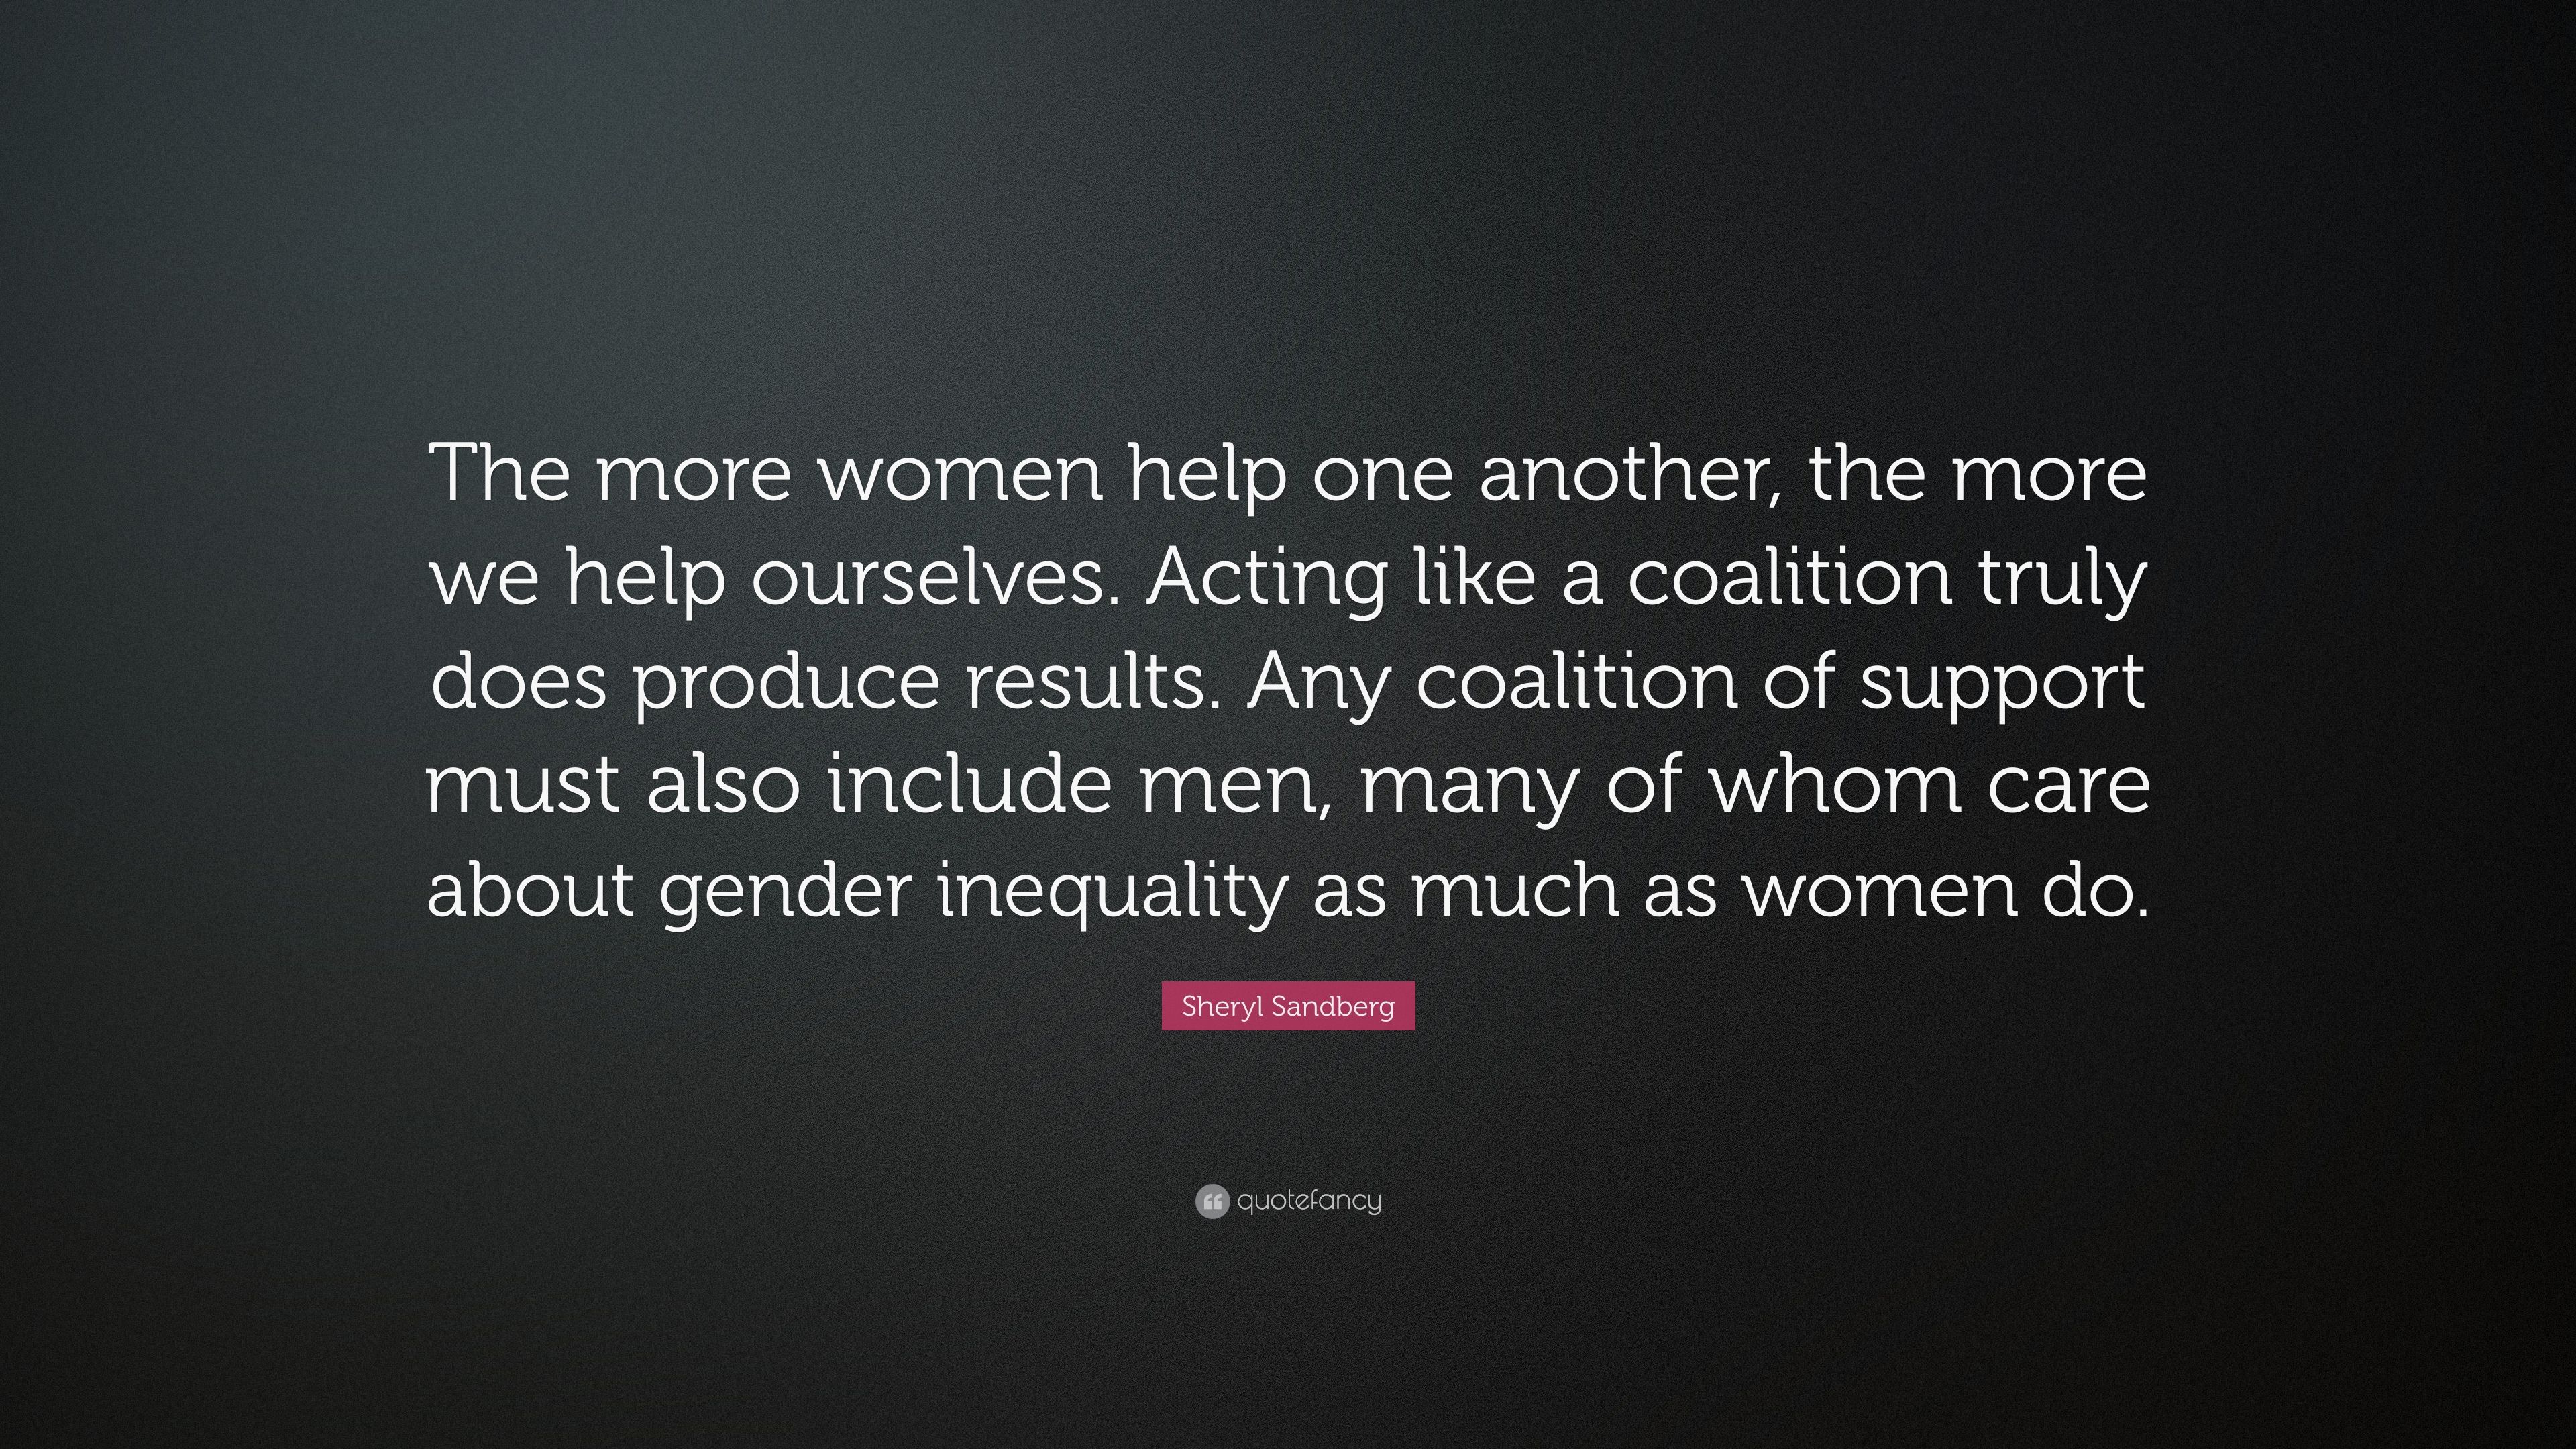 Sheryl Sandberg Quote: “The more women help one another, the more